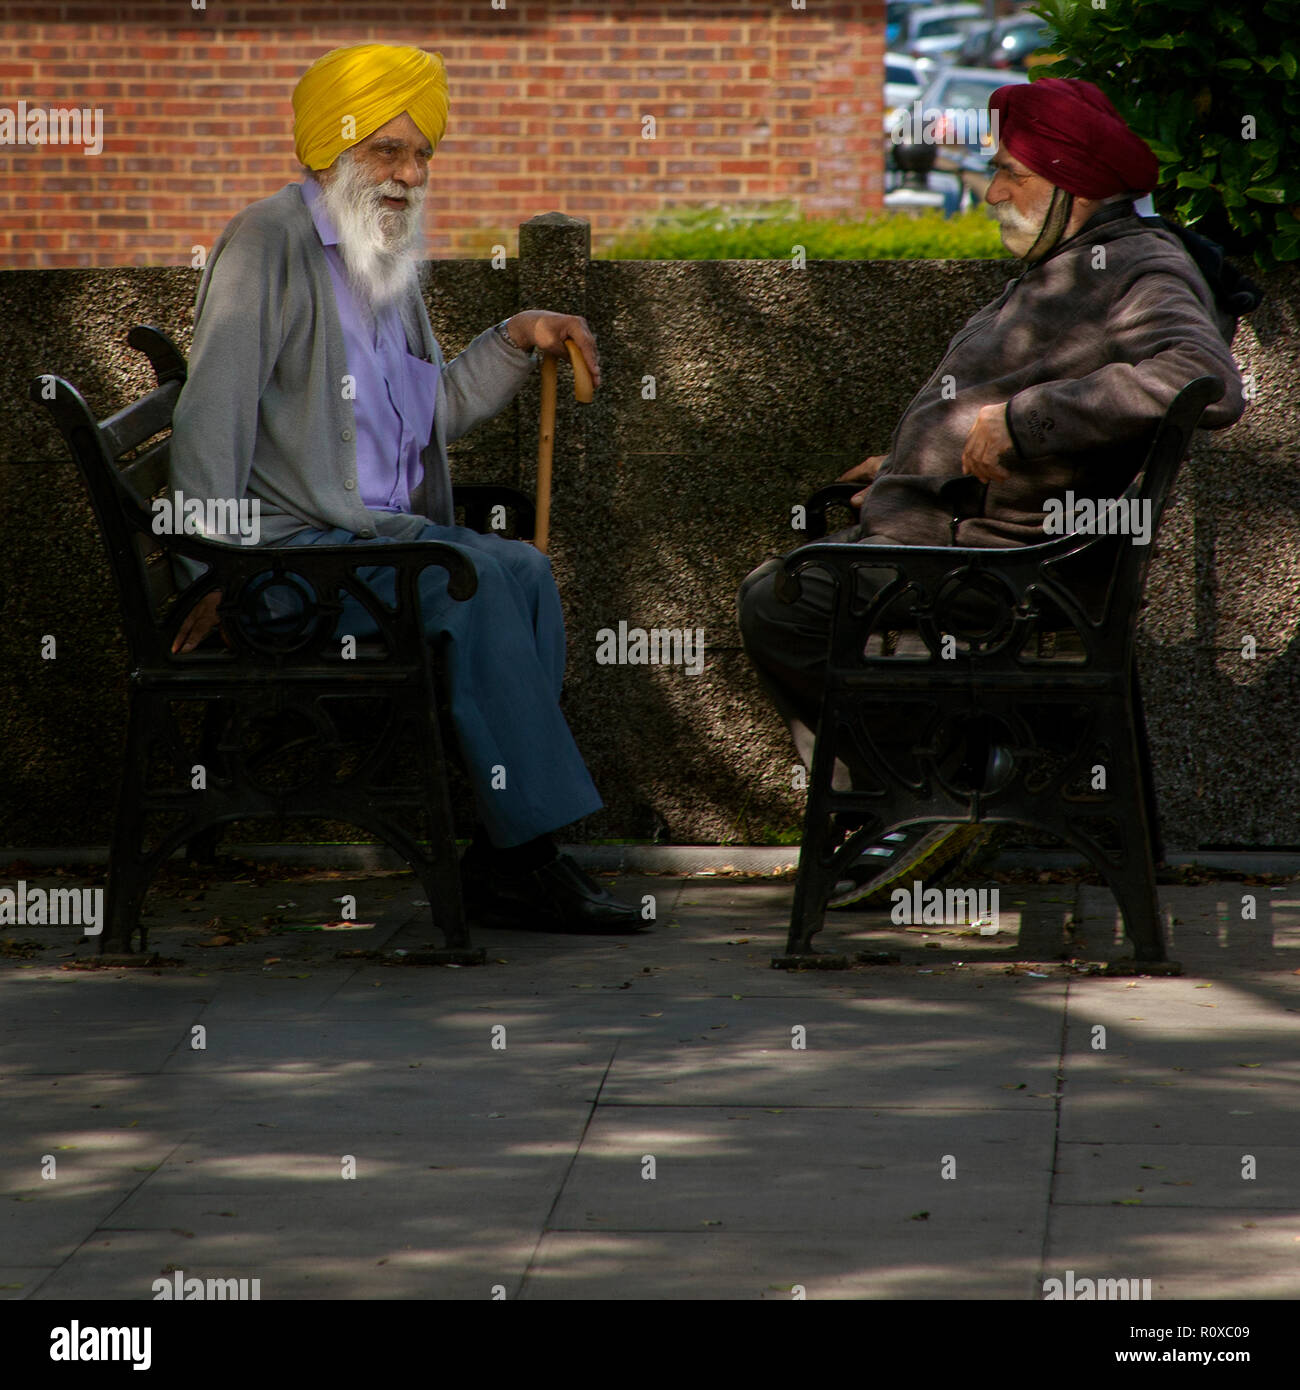 two elderly sikh man wearing yellow and red turbans sitting opposite each other on public benches Southall london Stock Photo